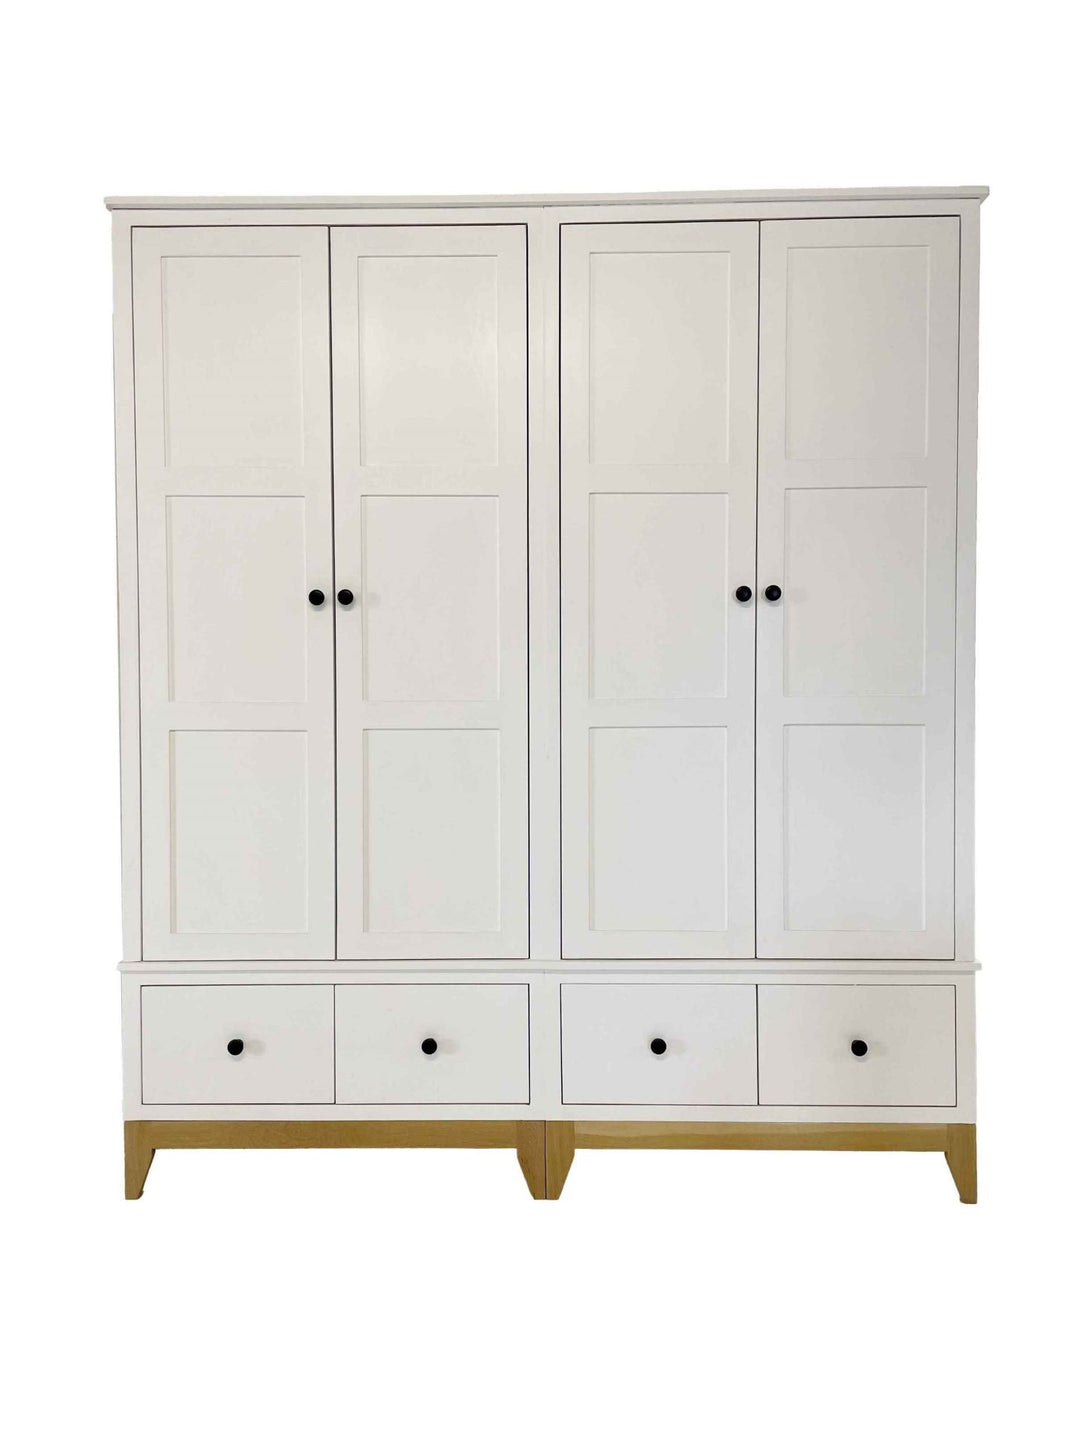 The Nordic Double with Drawers